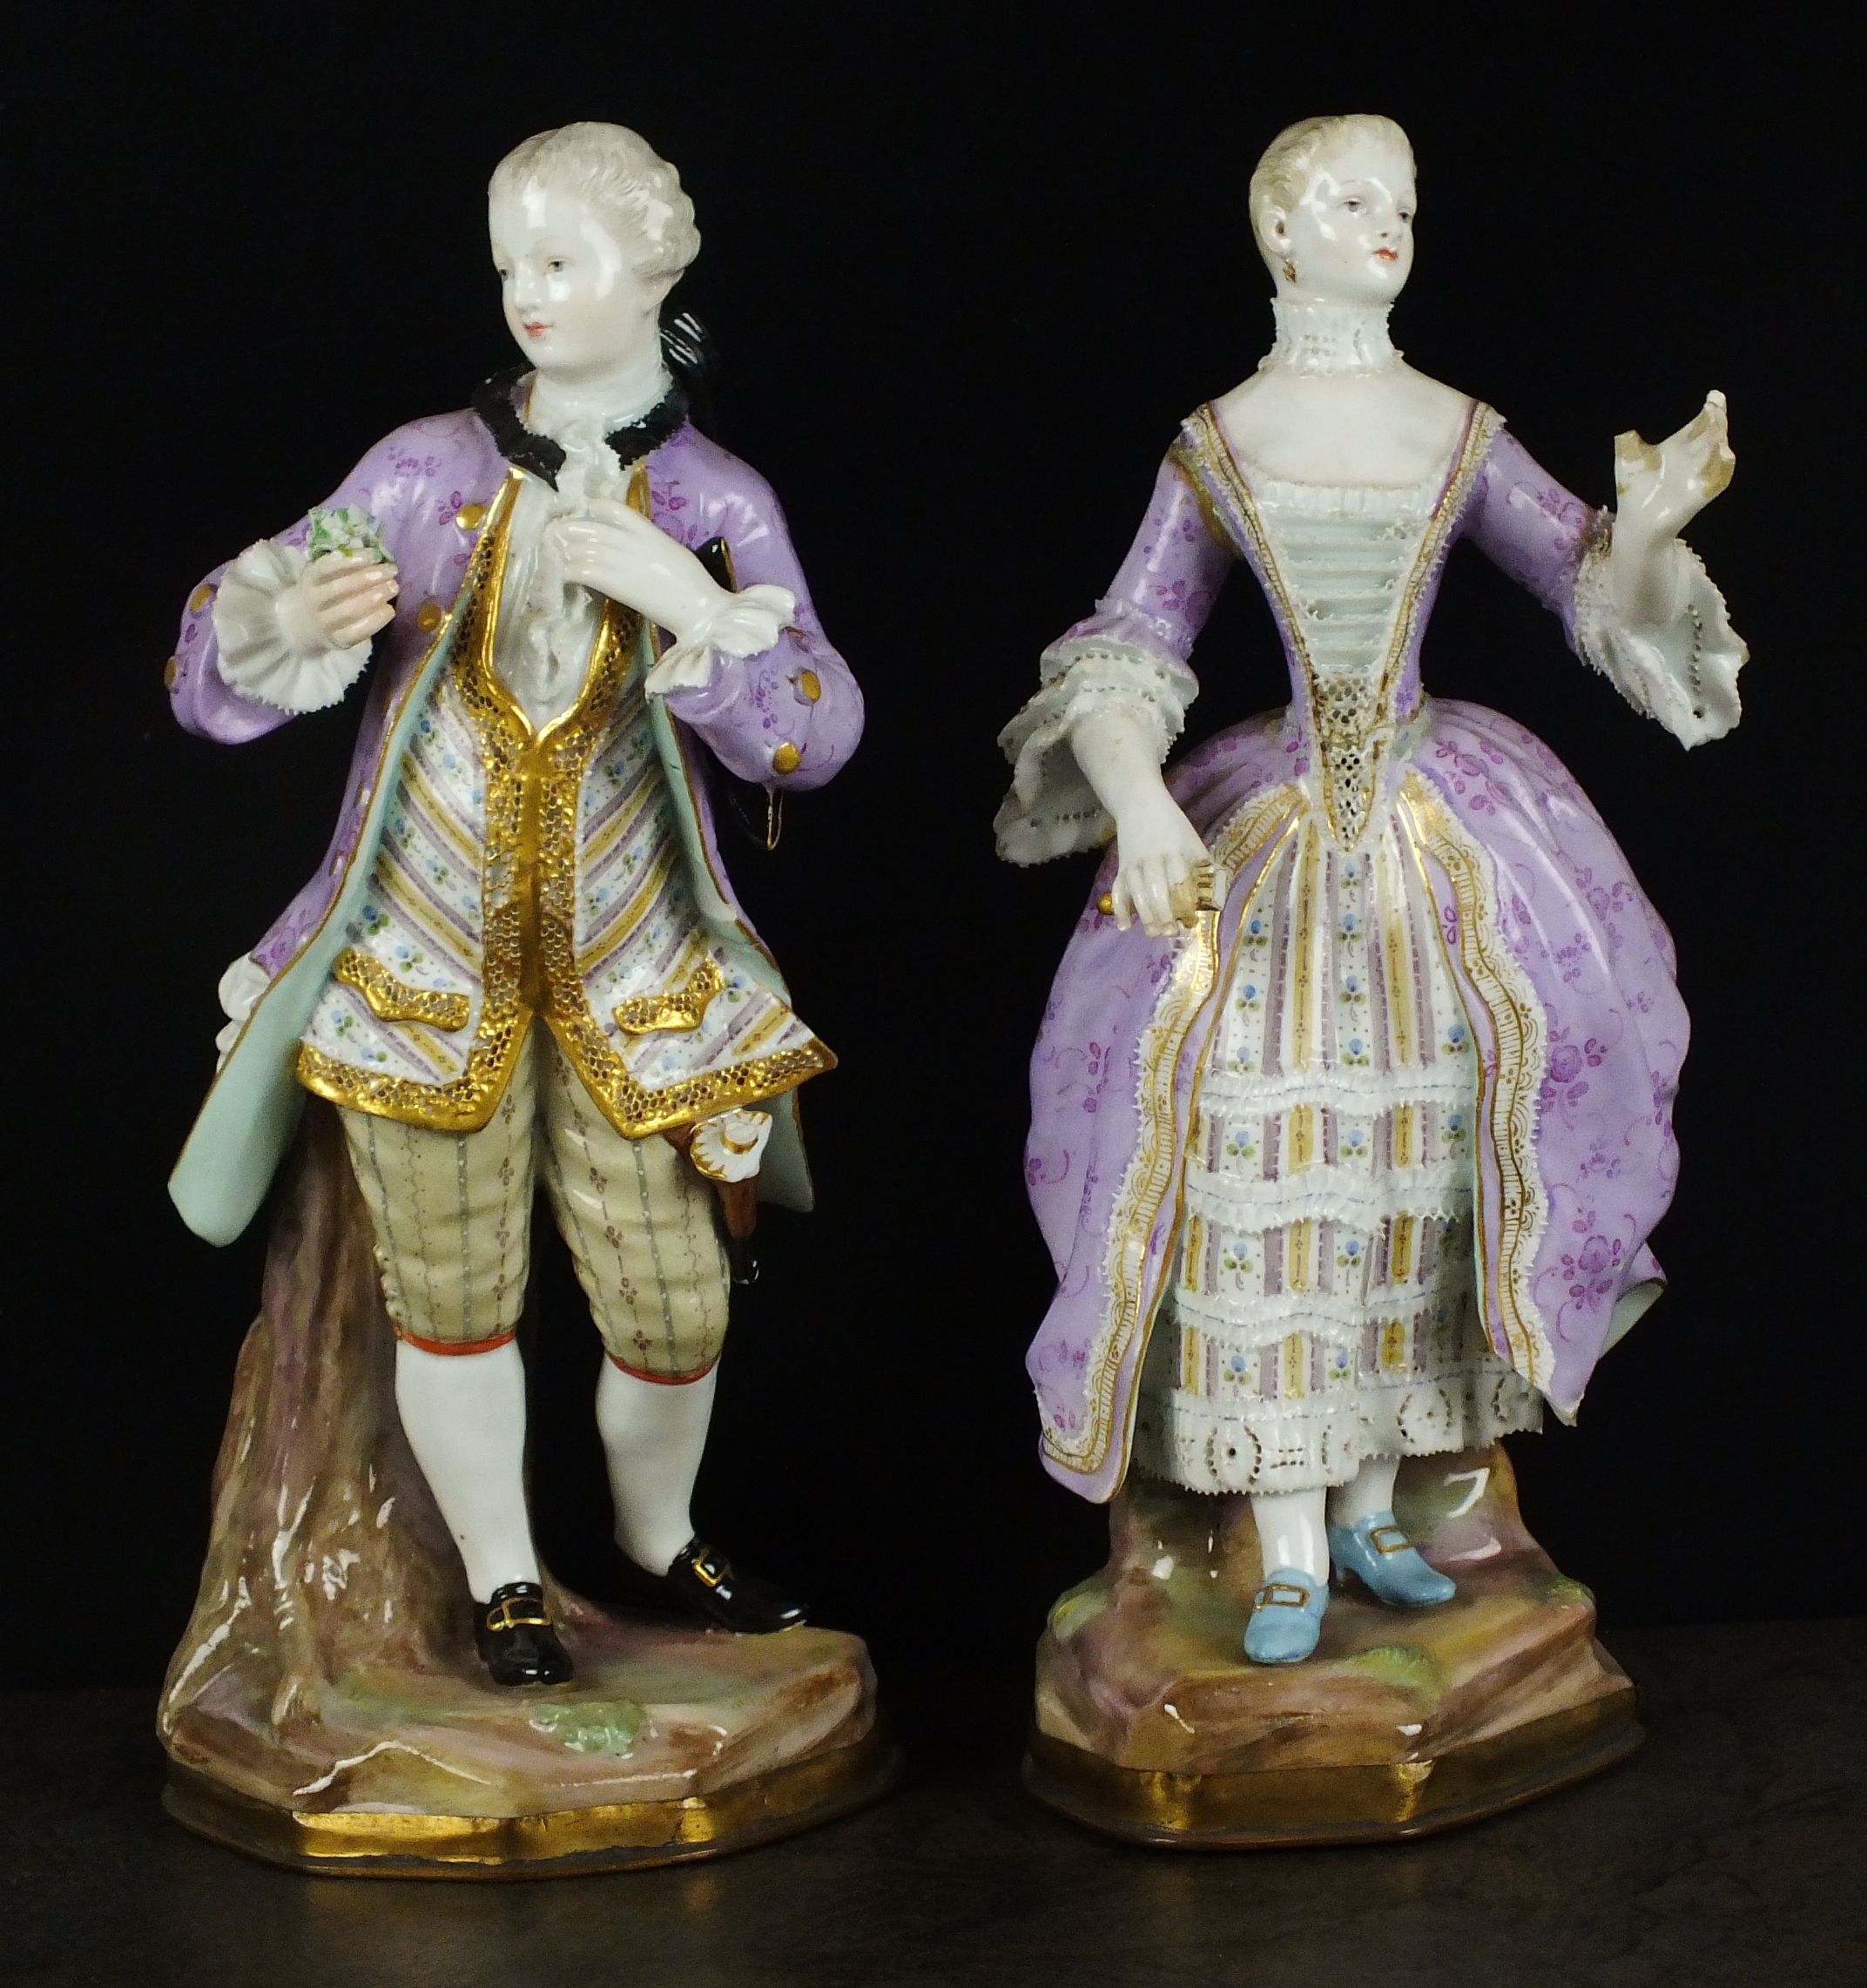 A pair of Continental porcelain figures, late 19th/early 20th century, modelled as a lady and